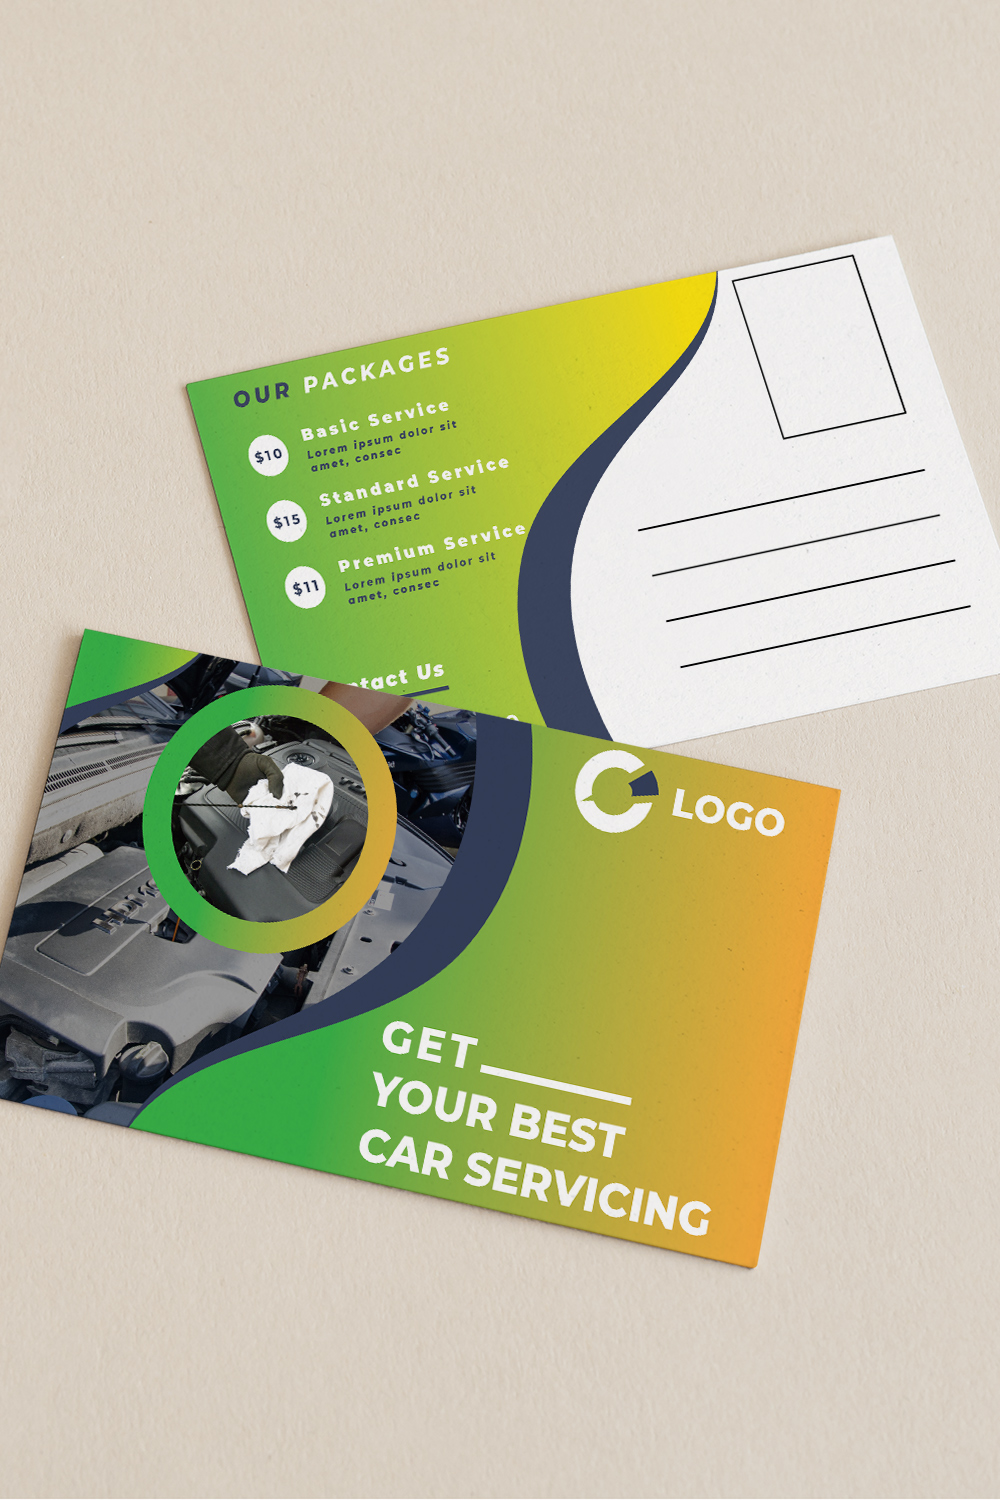 Car service business card with a photo of a car.